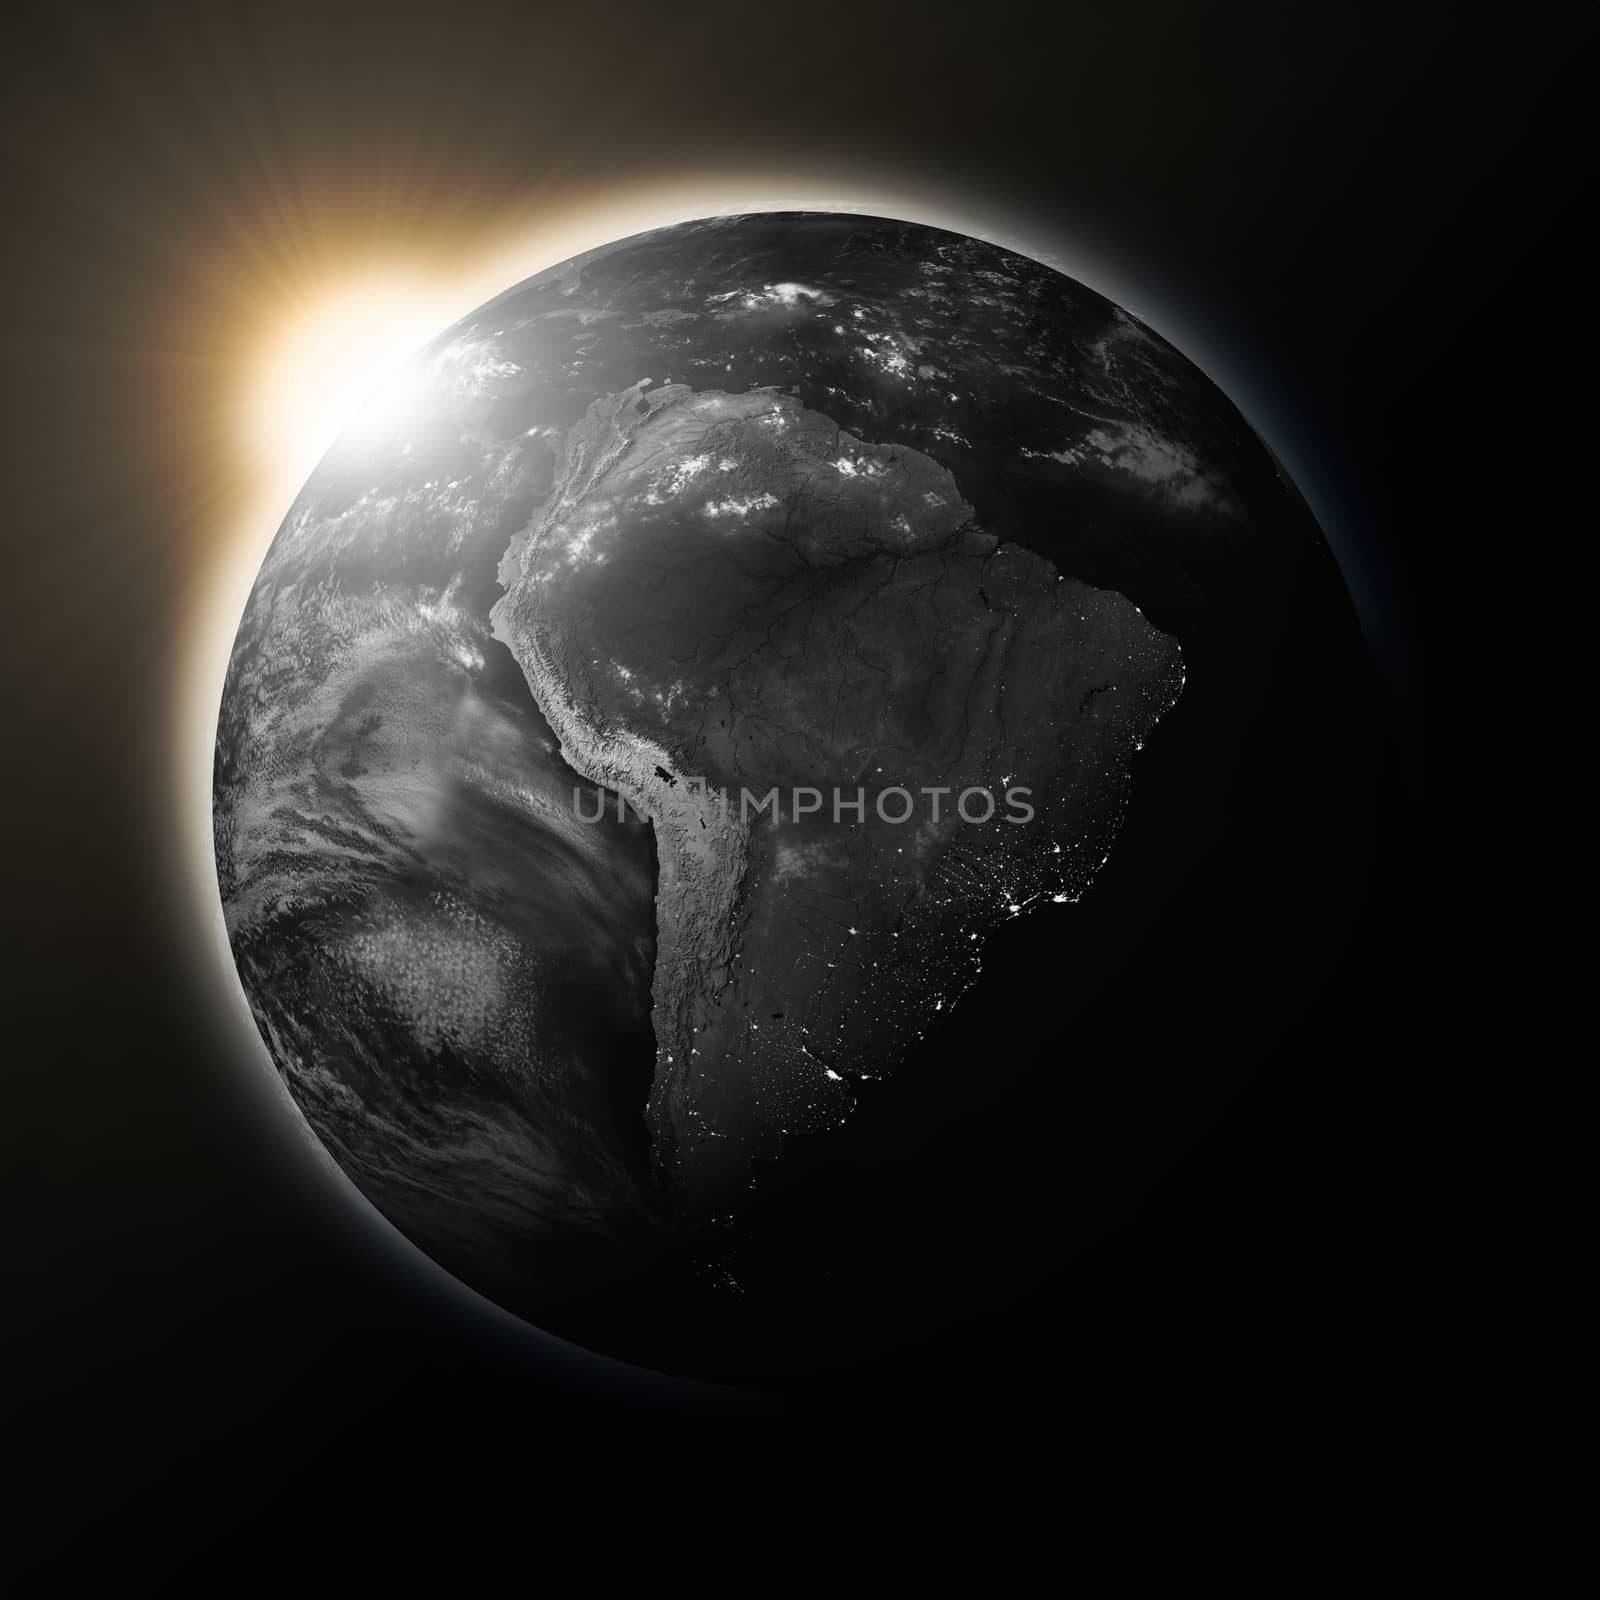 Sun over South America on dark planet Earth isolated on black background. Highly detailed planet surface. Elements of this image furnished by NASA.